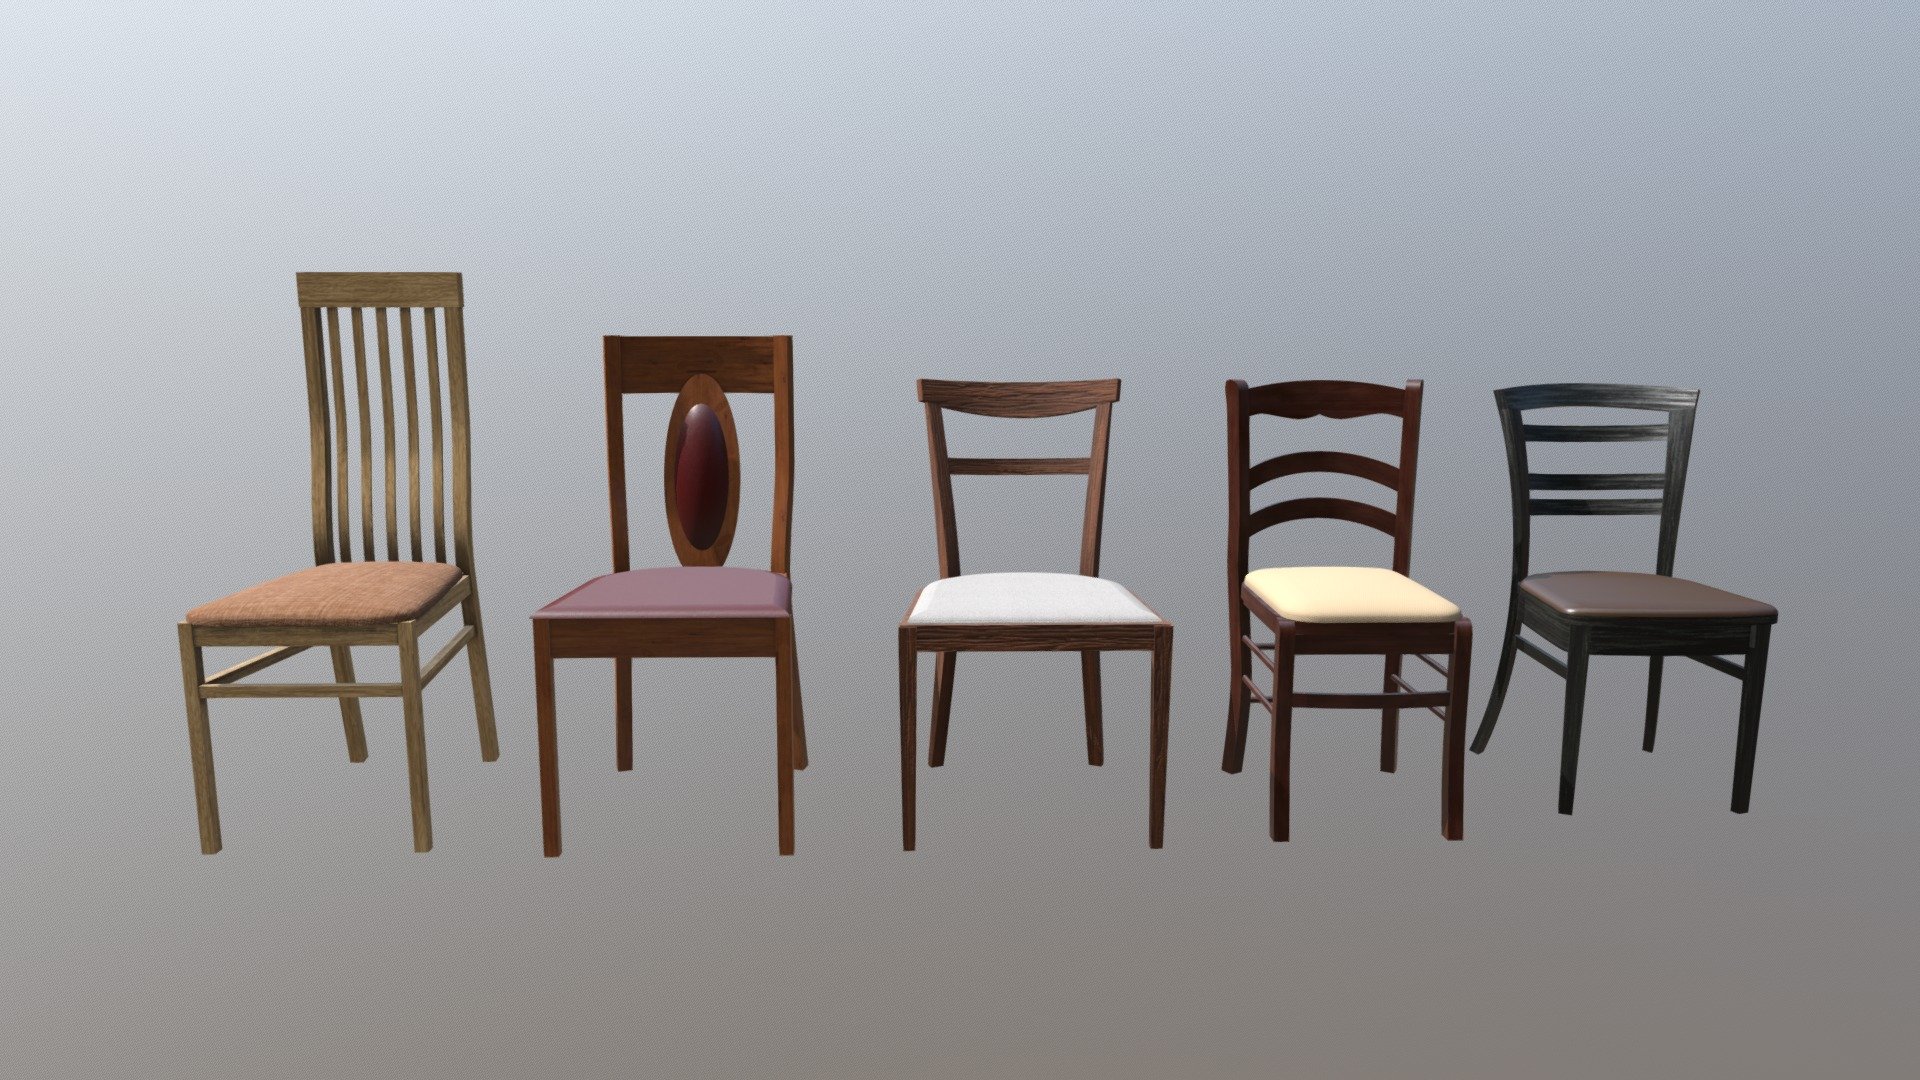 A set of wooden chairs. Material wood. Seat covers leather and fabric.
In the kit: Textures Unreal Engine 2048 x 2048. Textures Vray 2048 x 2048. Textures Unity 2048 x 2048. File FBX 3d model